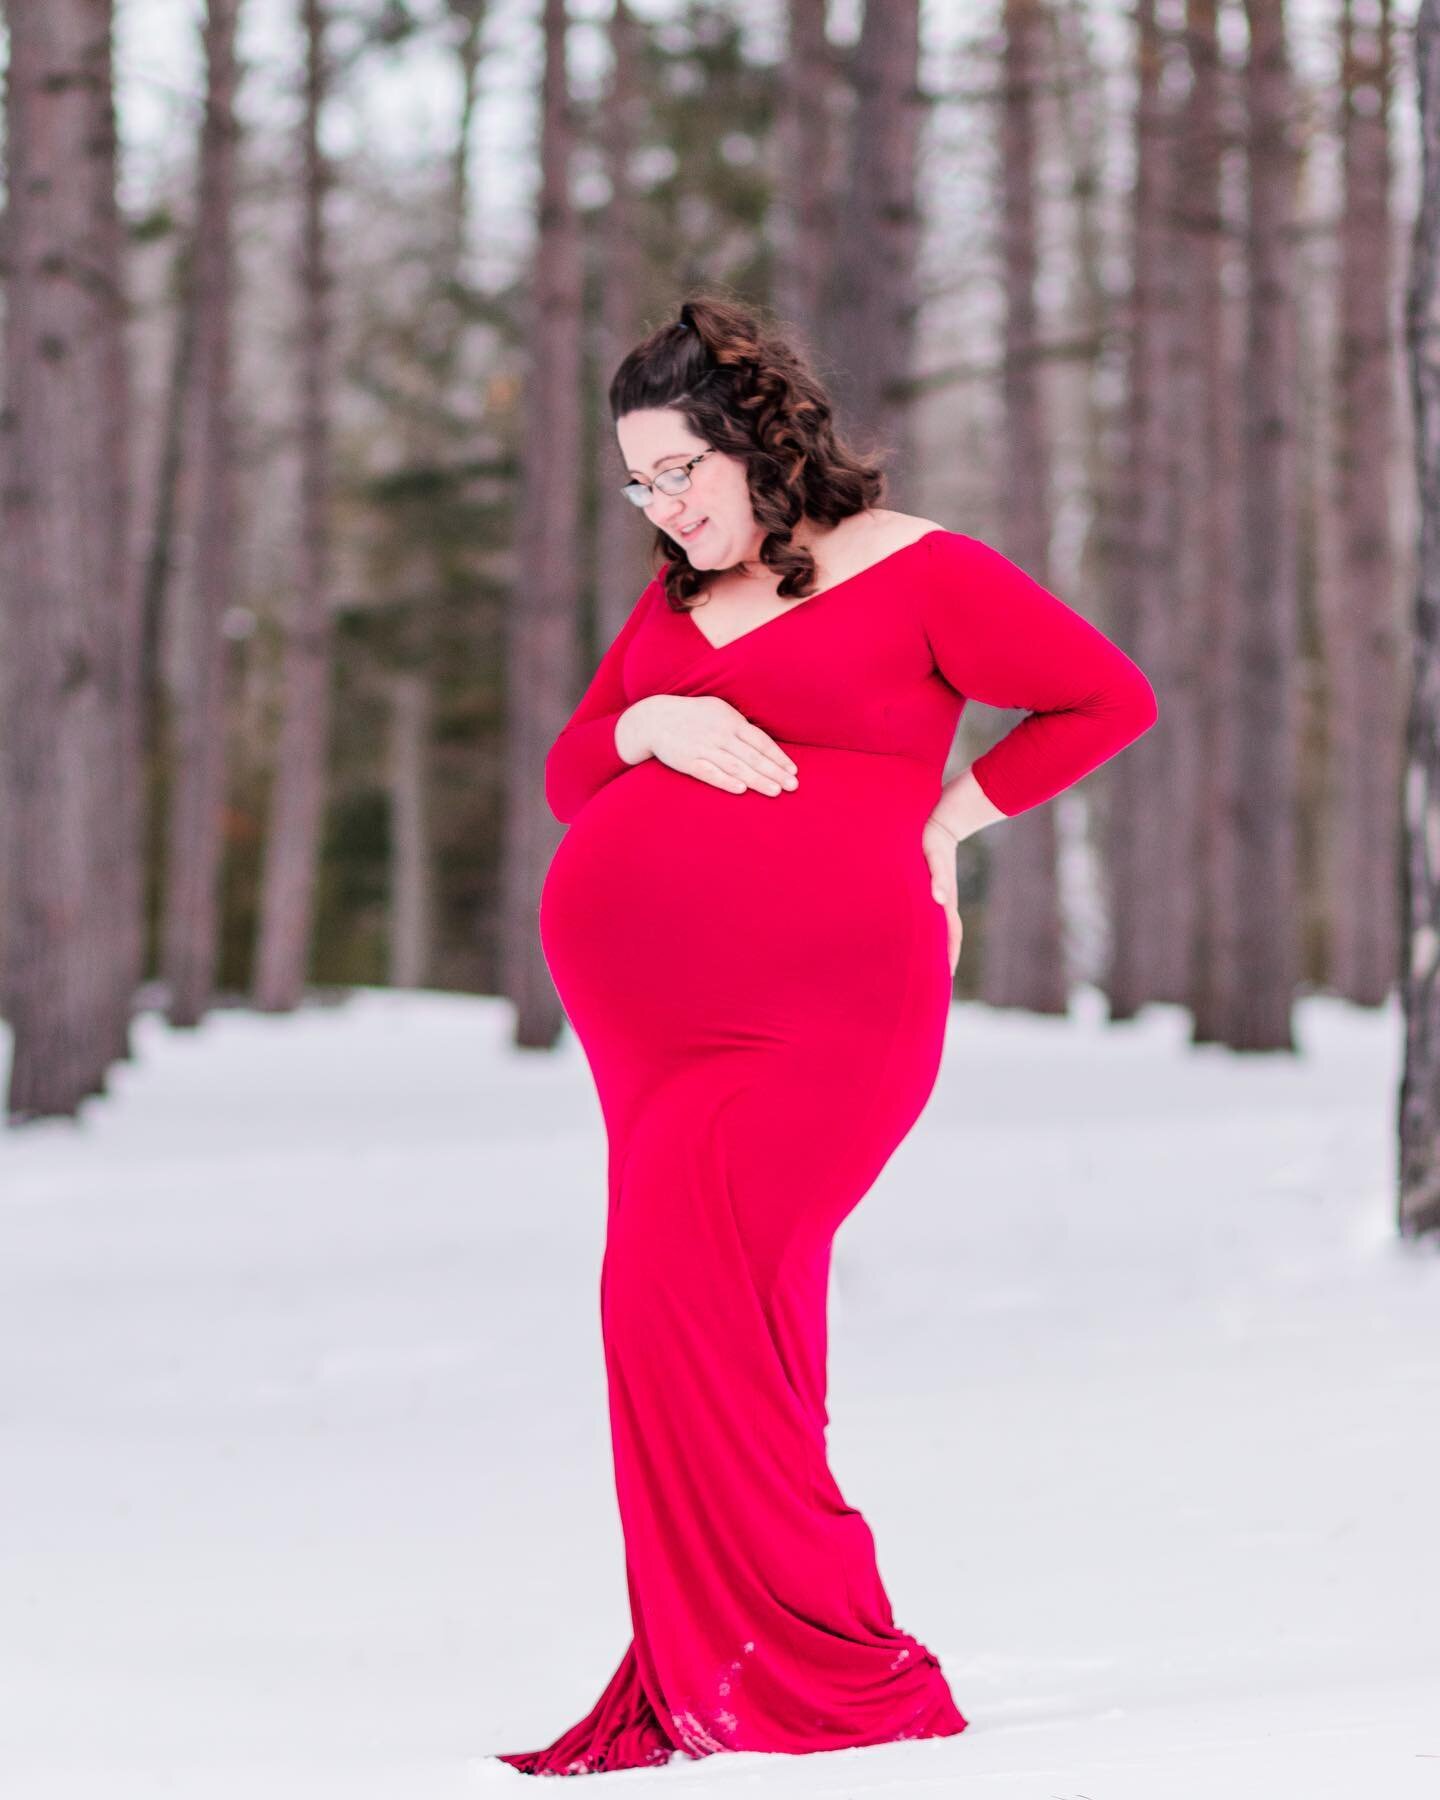 There are many different loves to celebrate today. I don&rsquo;t know if there is one more magical then a mother&rsquo;s love for her unborn child ❤️
Happy Valentine&rsquo;s Day
.
.
.
#valentinesday #motherslove #reddress #wintersession #maternitypho